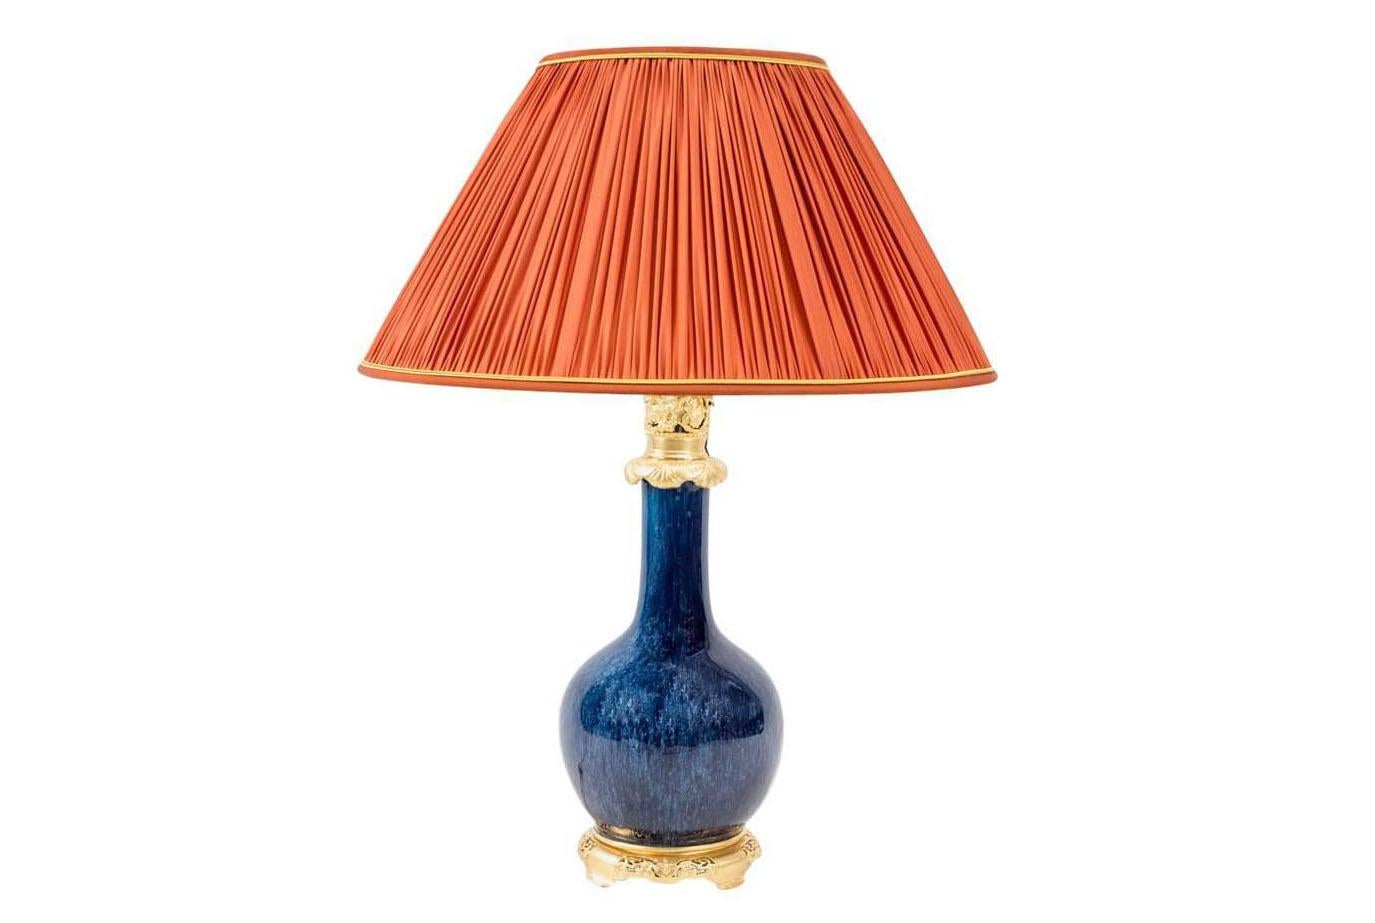 Bottle-shaped lamp in blue iridescent porcelain, imitating goldstone. Chiseled and gilt bronze mount with a circular openwork base and an upper part with chiseled vine branches and leaves.
Brand new and functional electrical system.
Made in the late